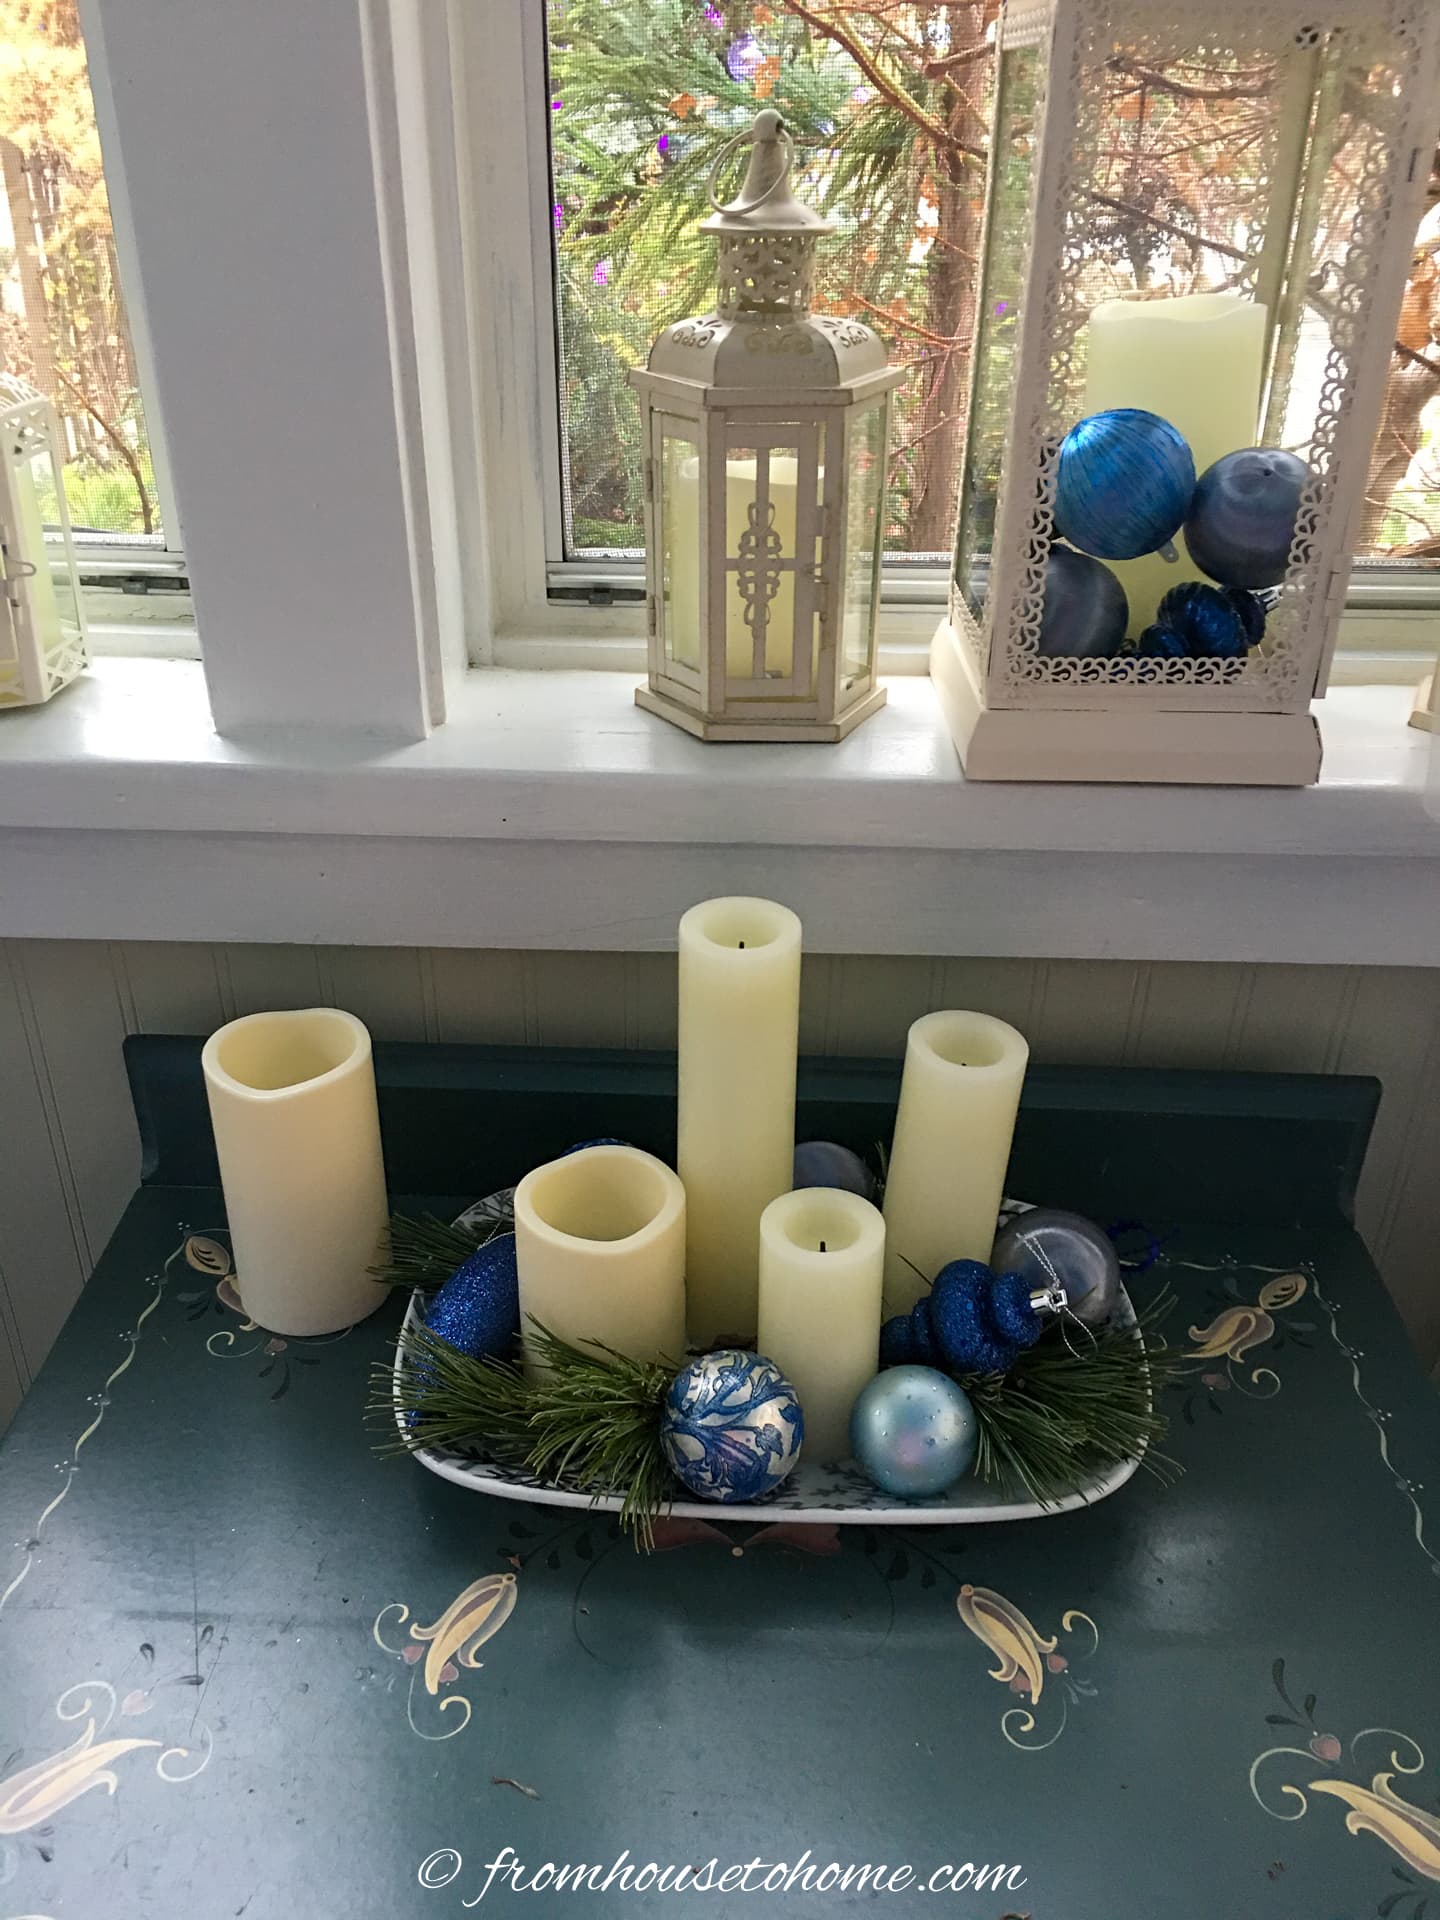 Candles on a tray with Christmas ornaments